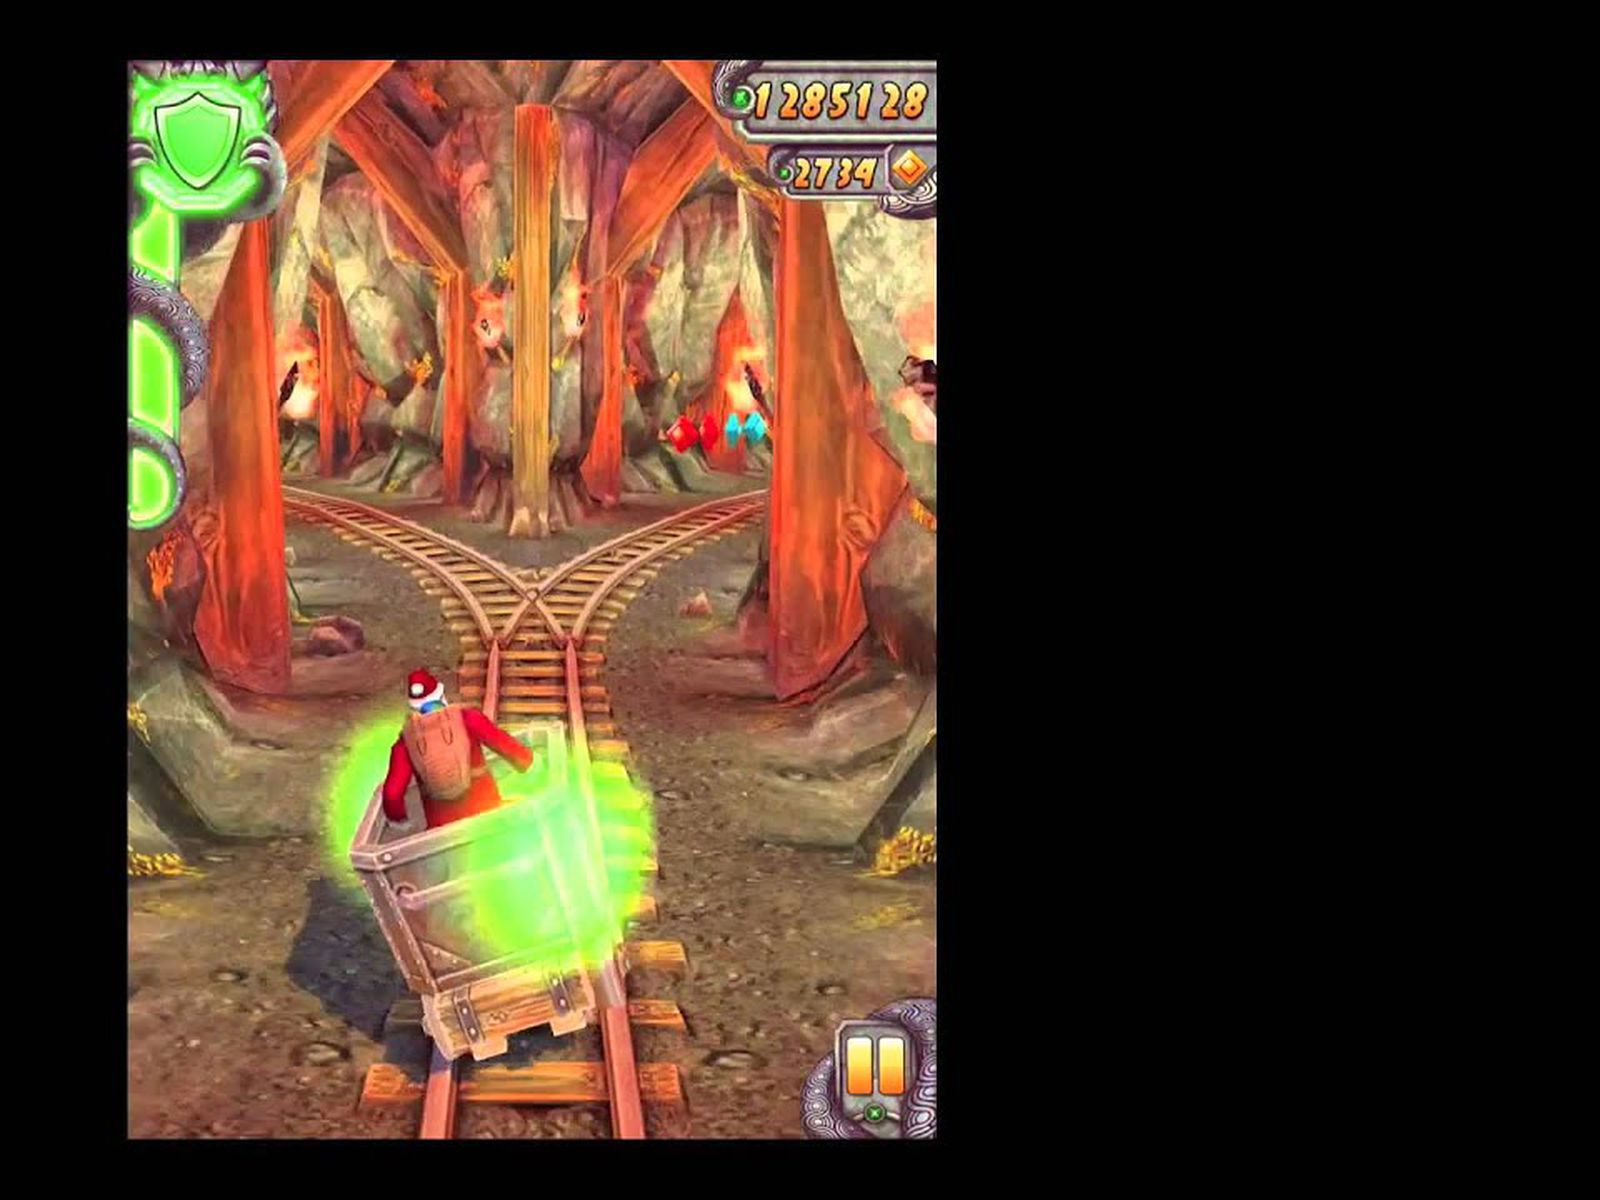 Official Temple Run Game Runs And Slides Onto Android - Download Now!